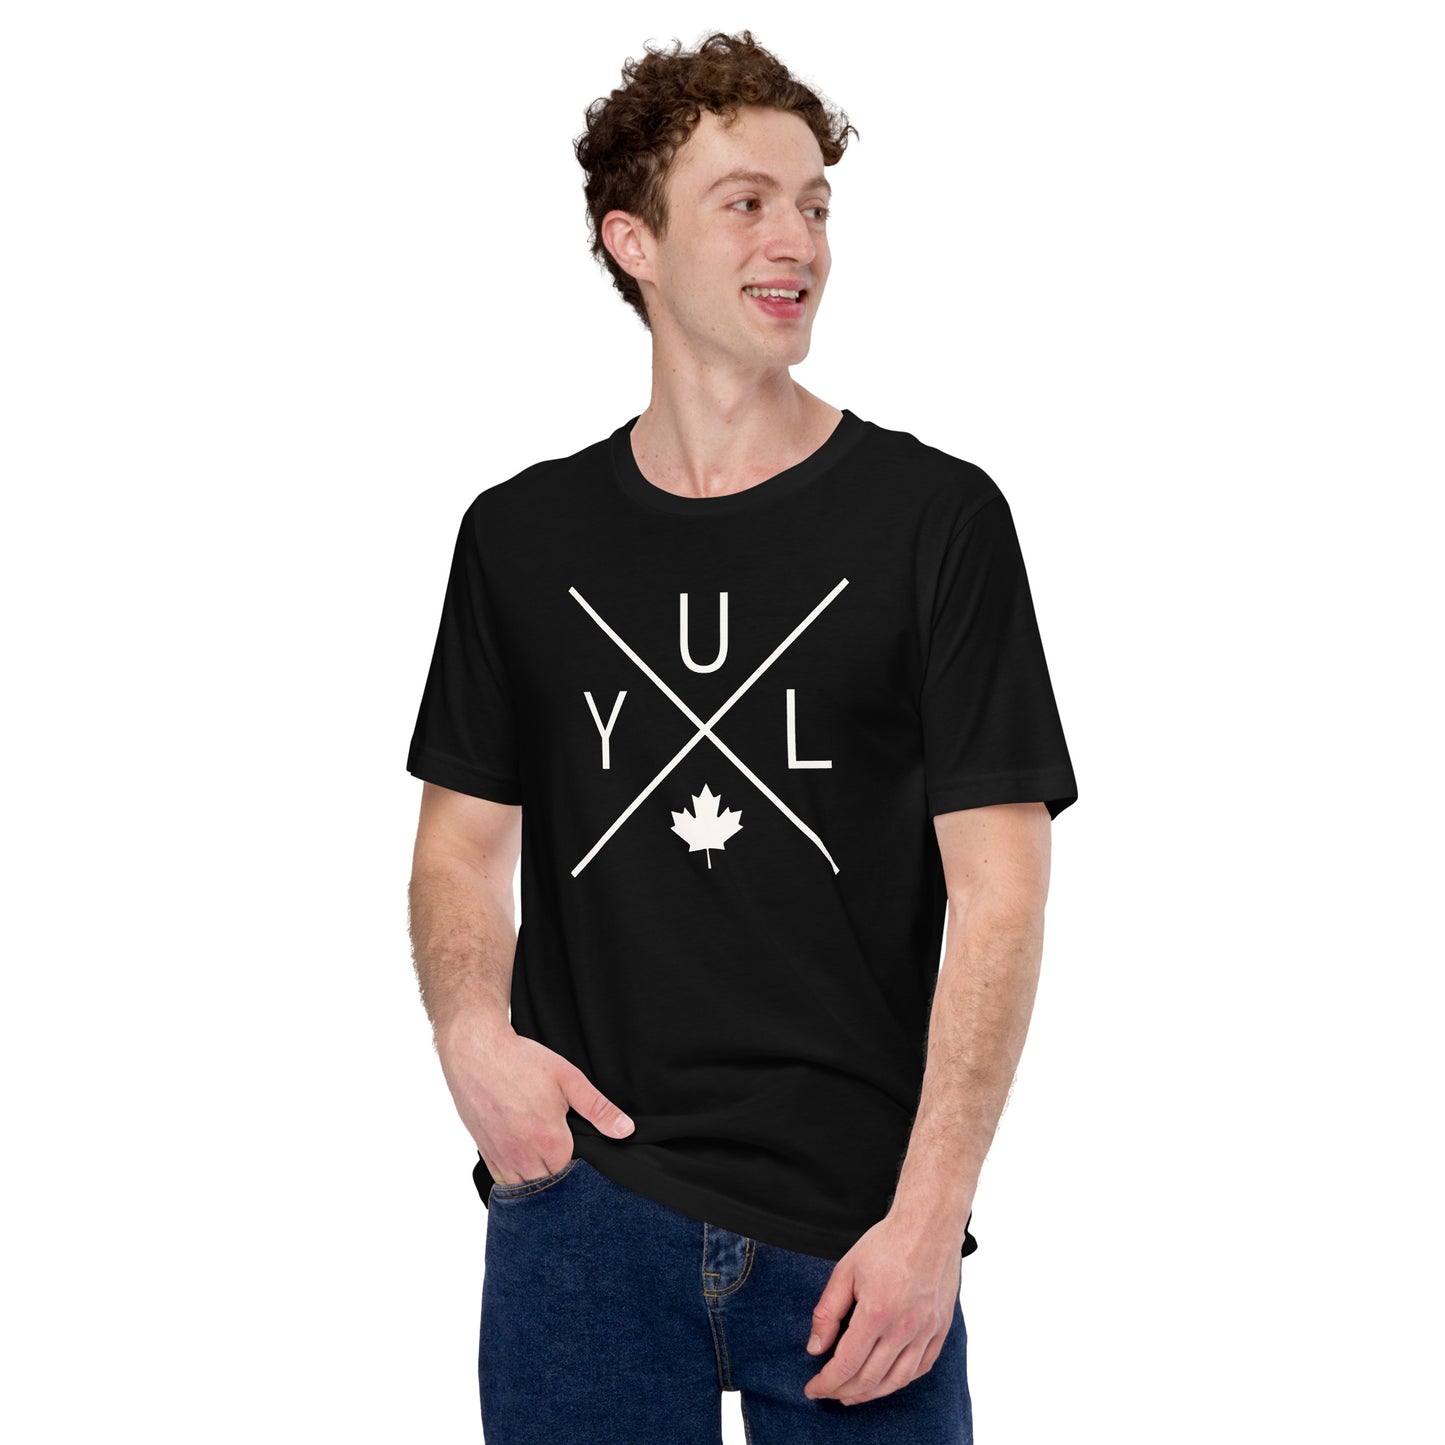 Crossed-X T-Shirt - White Graphic • YUL Montreal • YHM Designs - Image 06